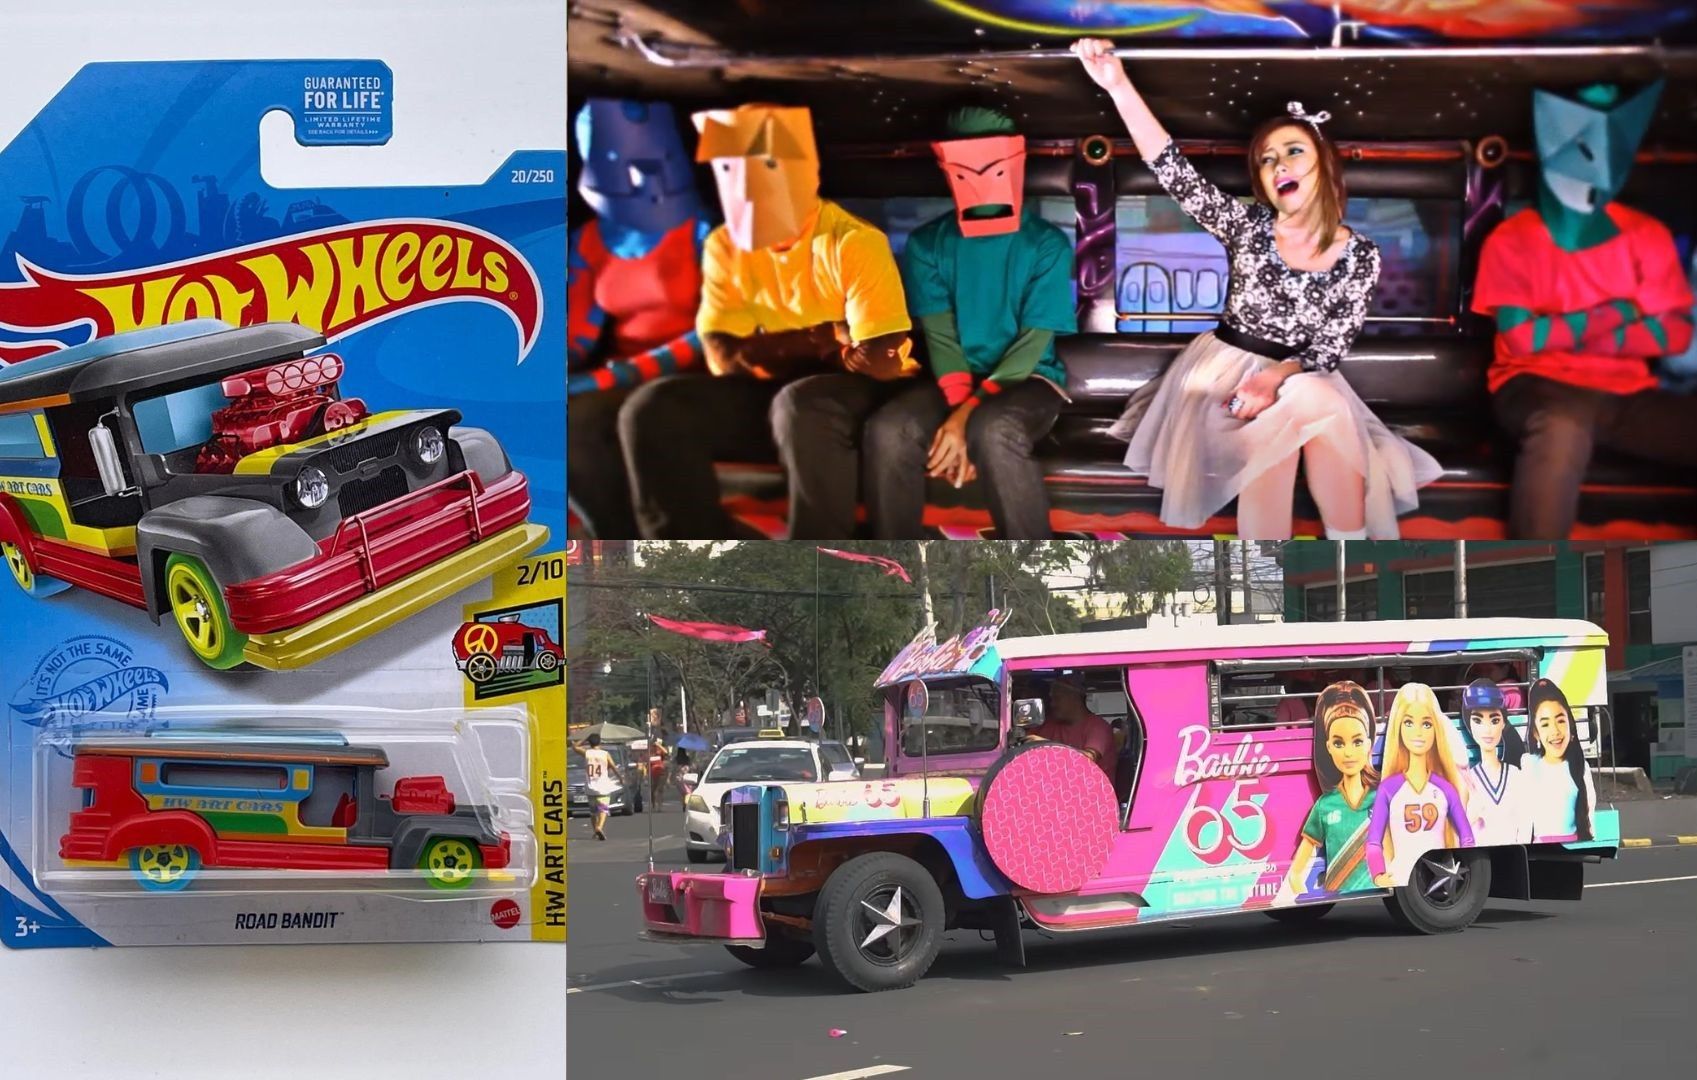 The lasting legacy of jeepneys in Filipino pop culture